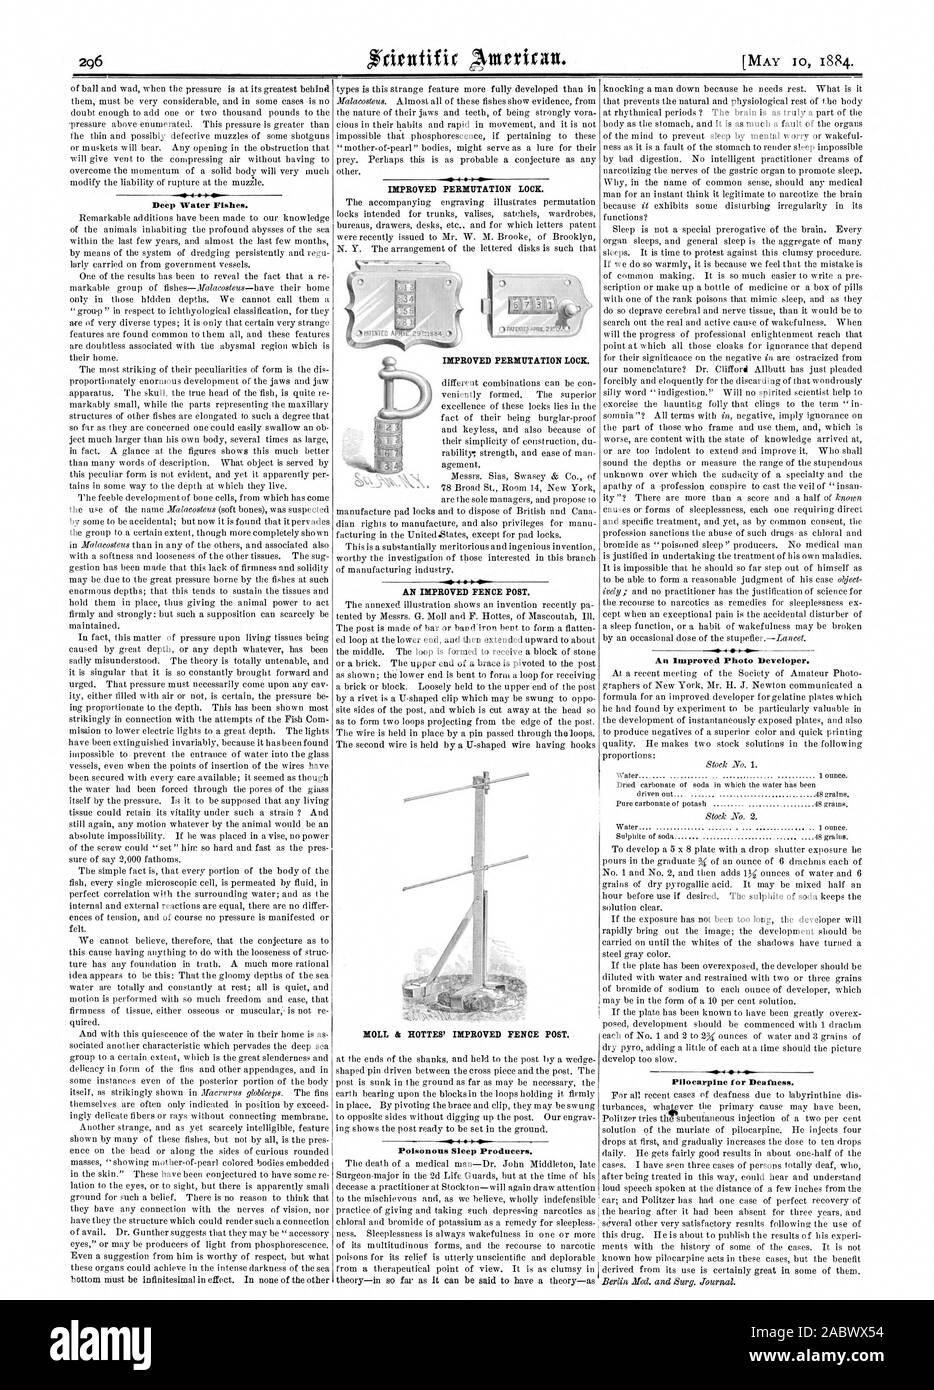 Deep Water Fishes. Poisonous Sleep Producers. An Improved Photo Developer. Pilocarpine for Deafness., scientific american, 1884-05-10 Stock Photo